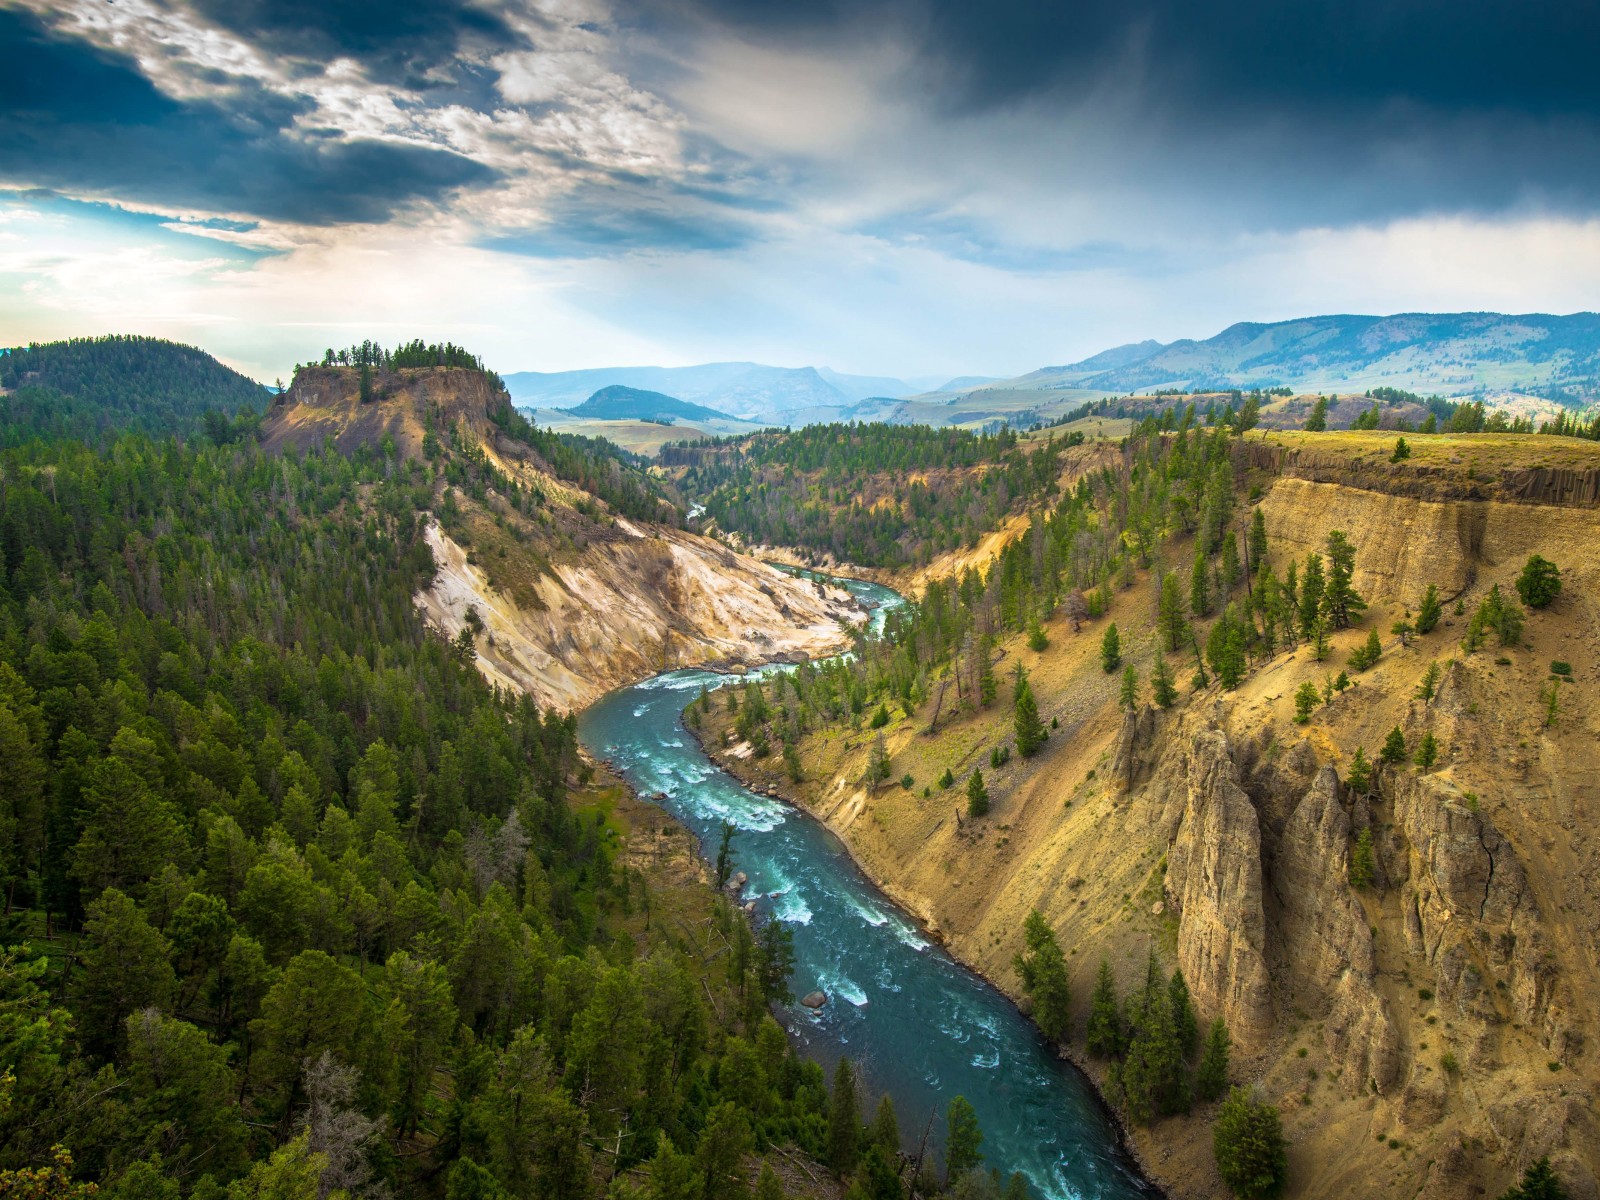 The River, Grand Canyon of Yellowstone National Park, USA Wallpaper for Desktop 1600x1200